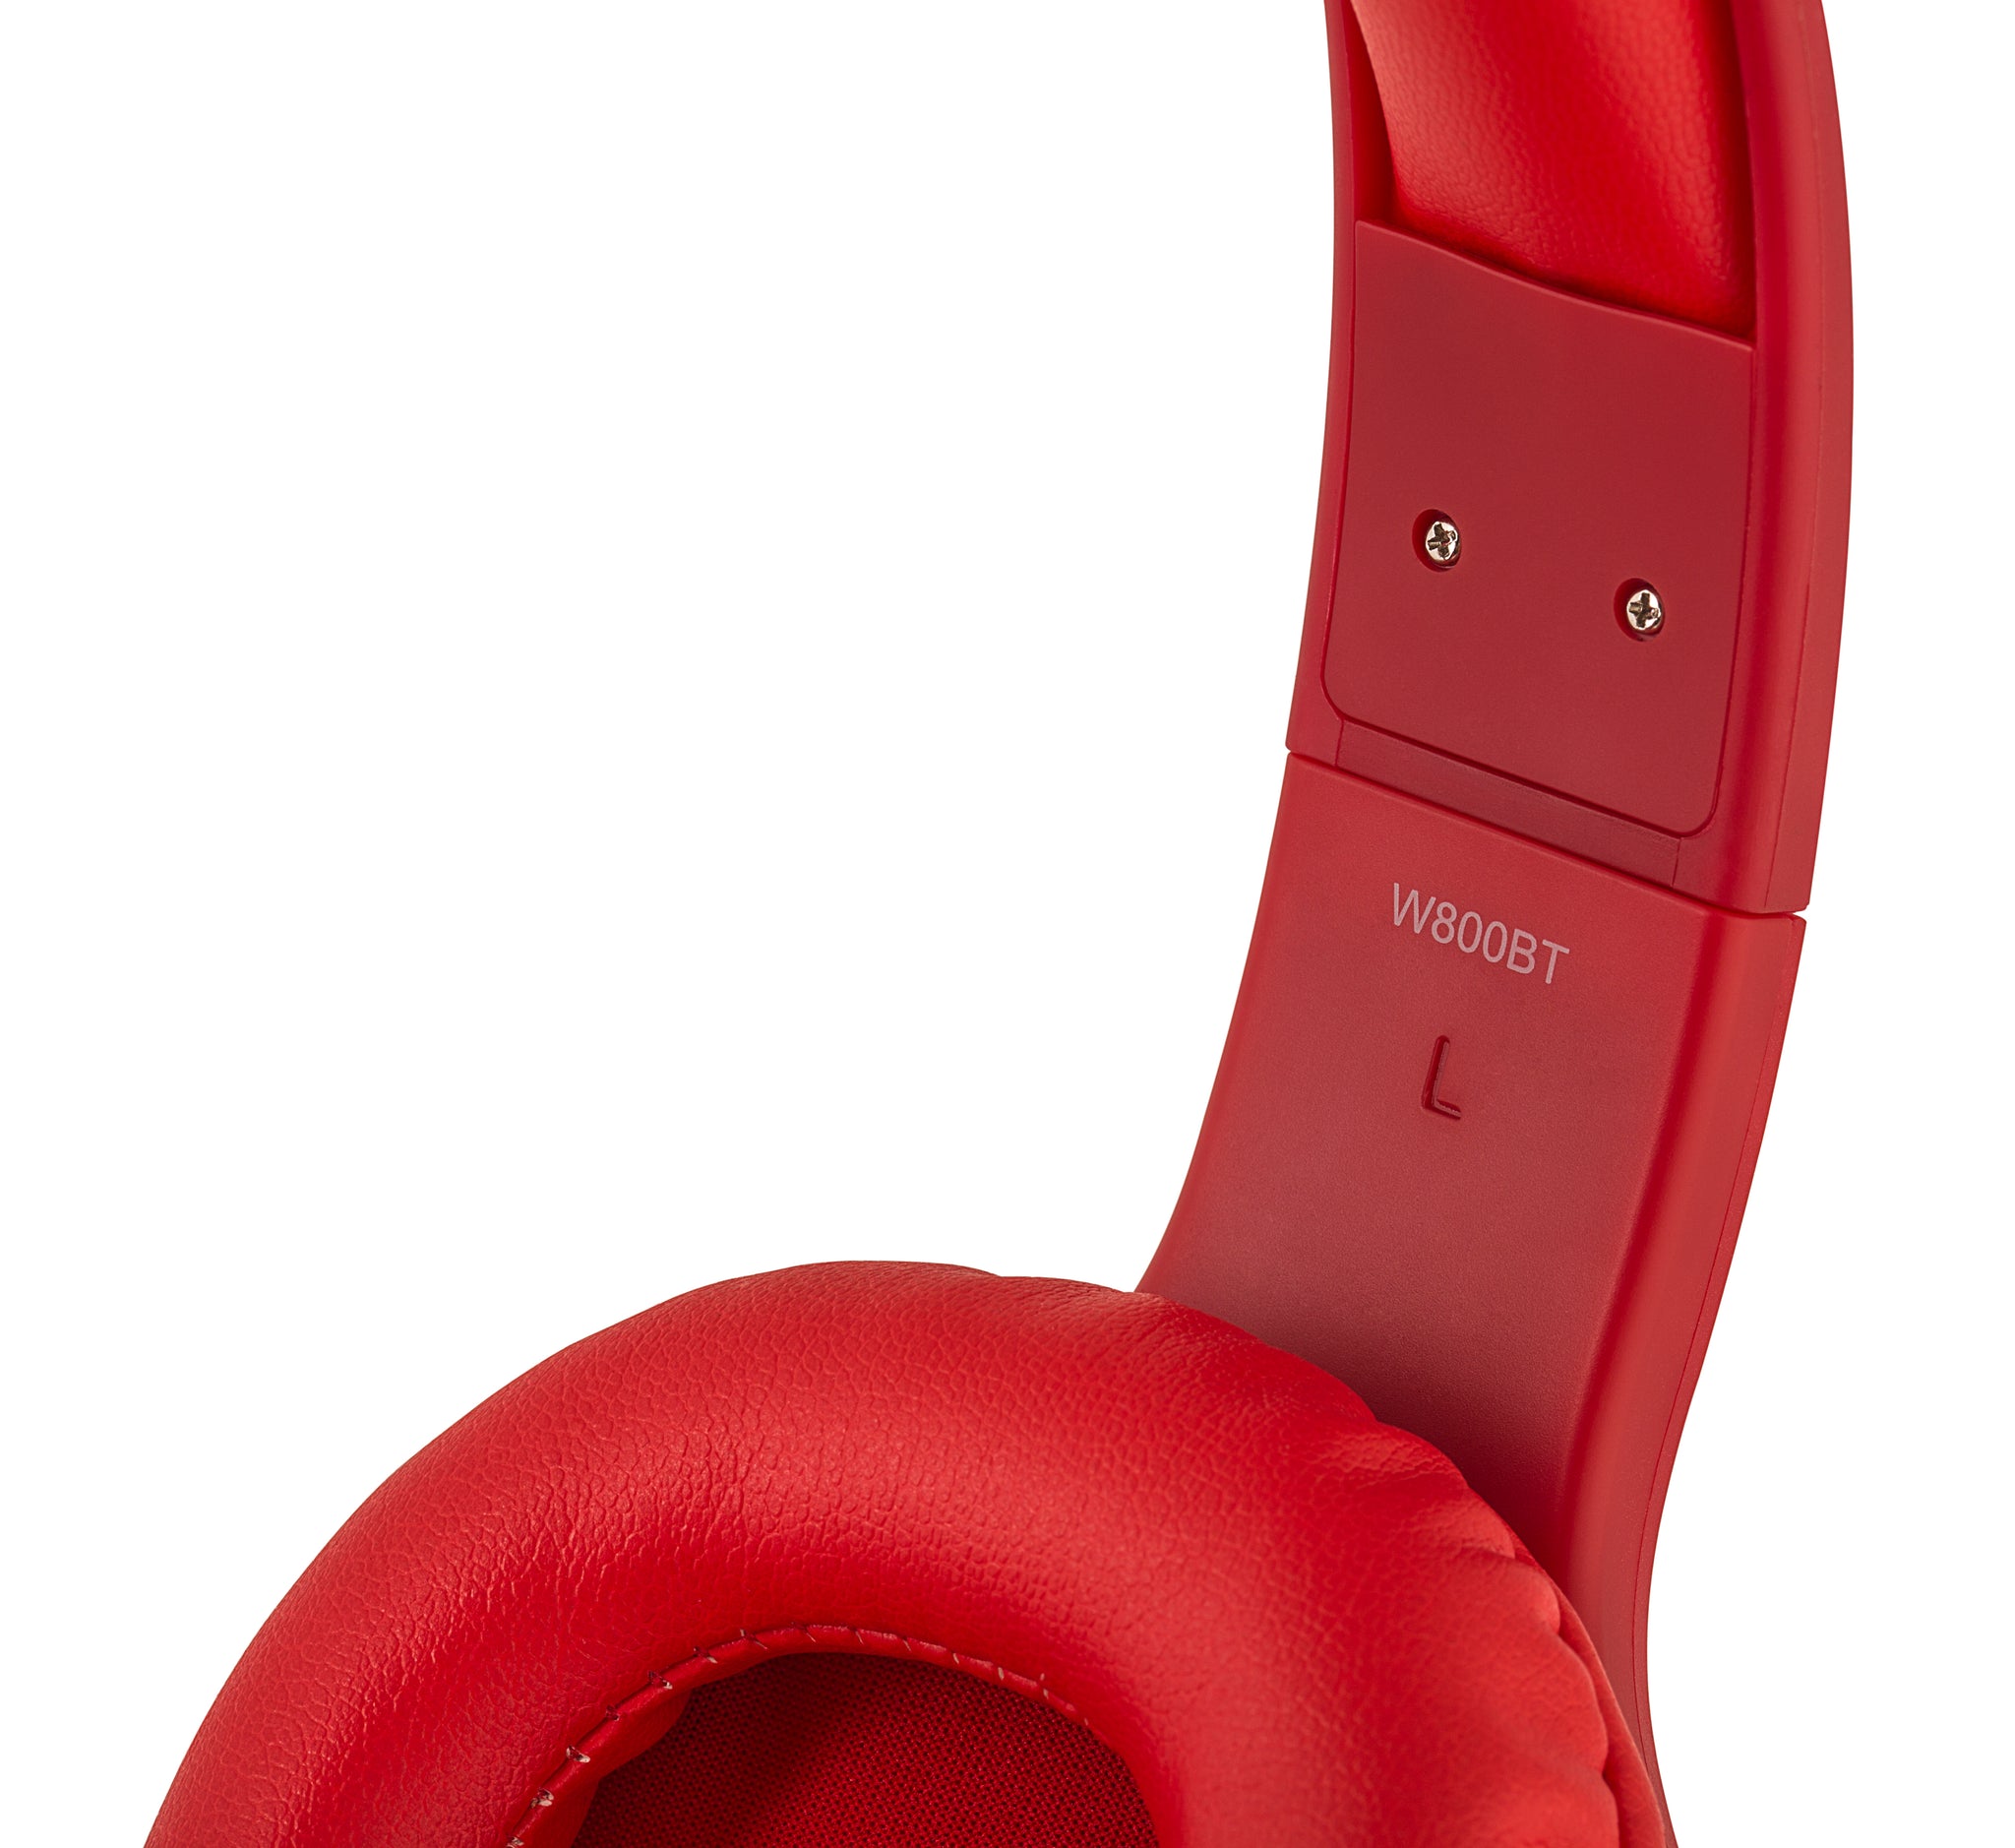 Edifier W800BT Plus Wired And Wireless Bluetooth Headphones - Red